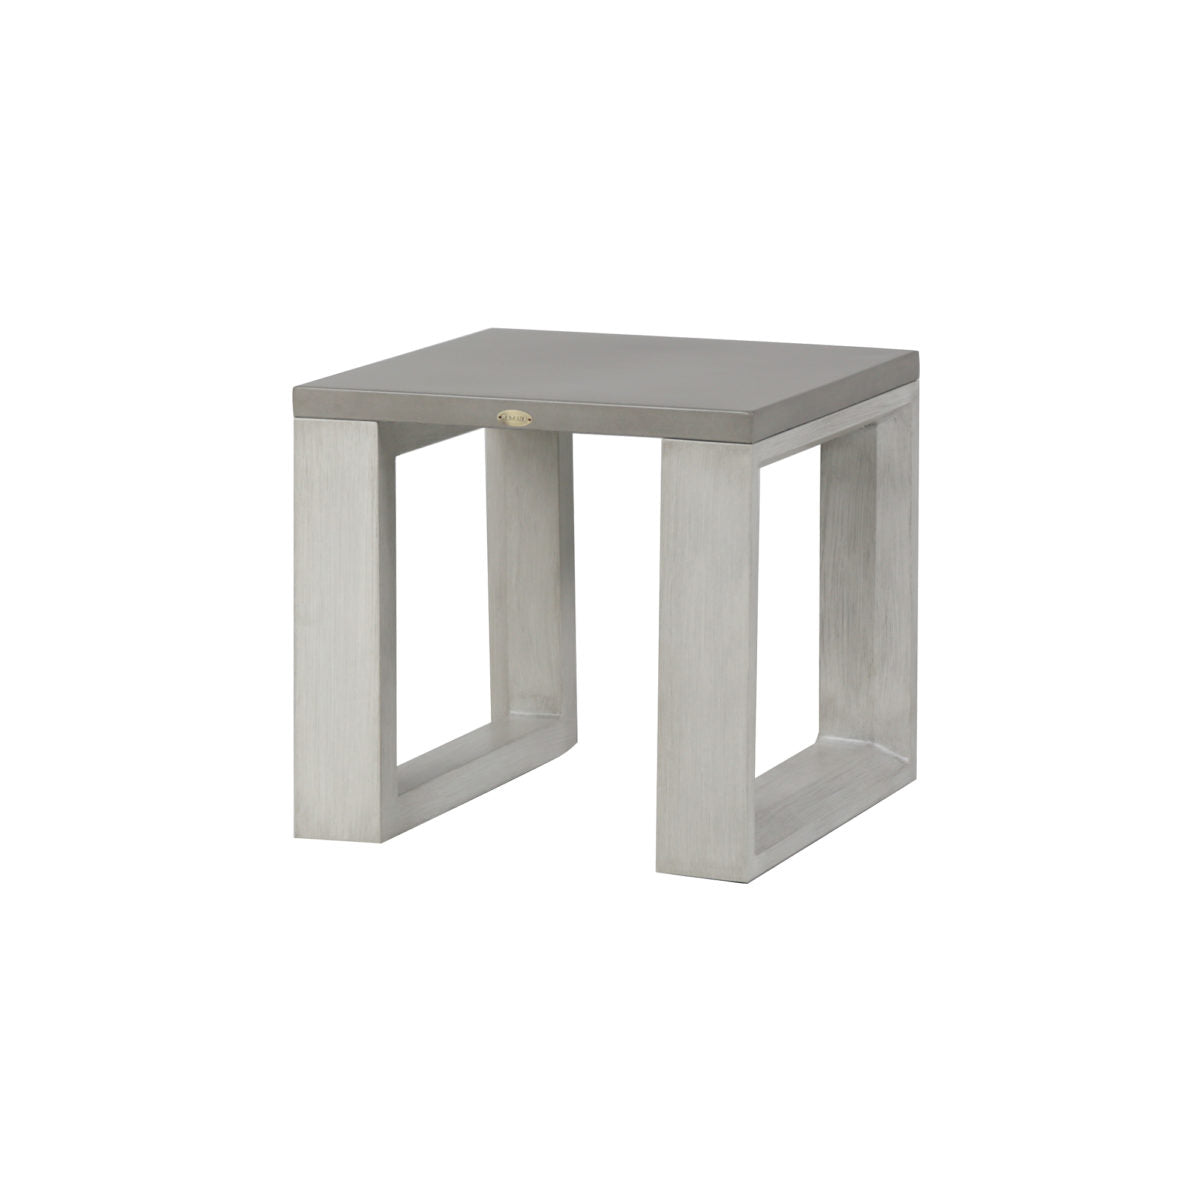 Ratana Element 5.0 Outdoor Side Table